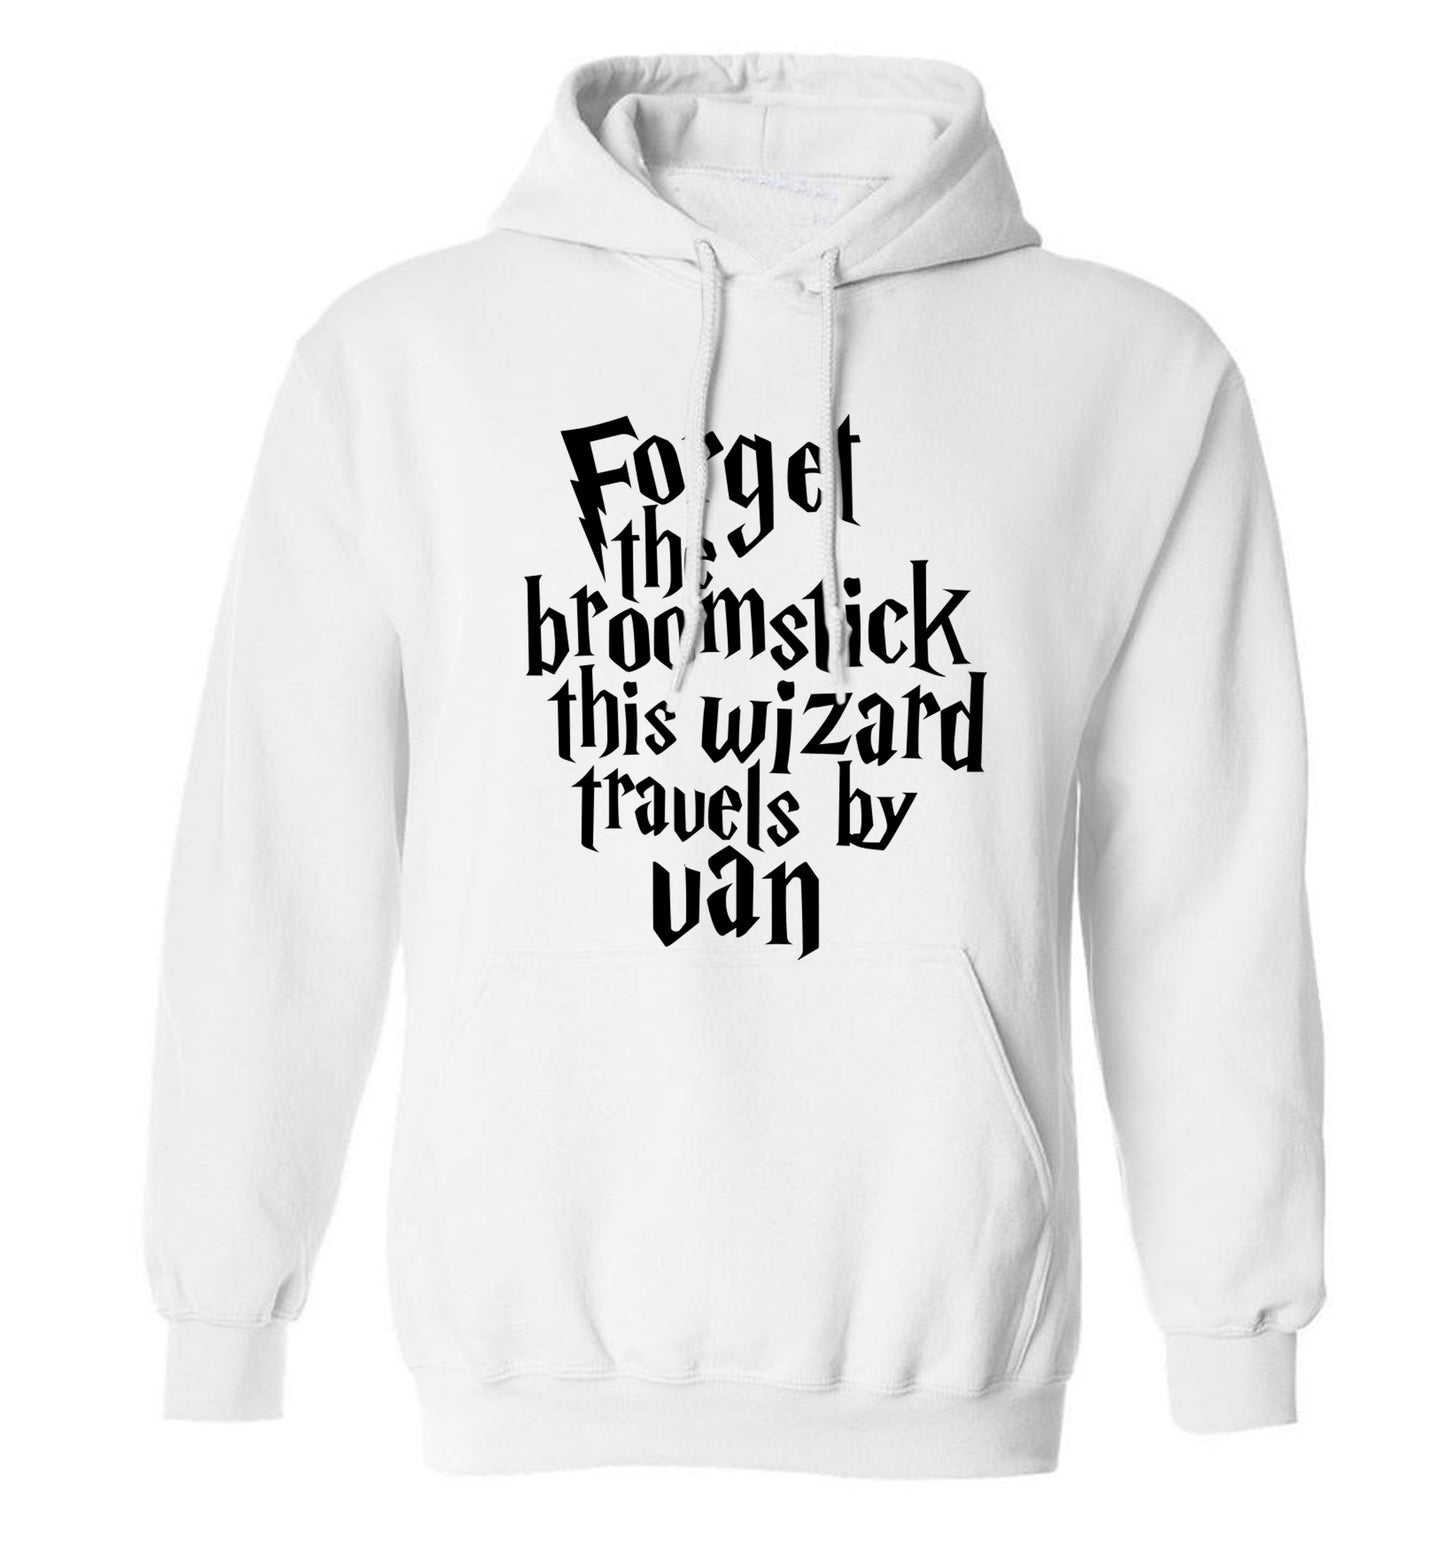 Forget the broomstick this wizard travels by van adults unisexwhite hoodie 2XL